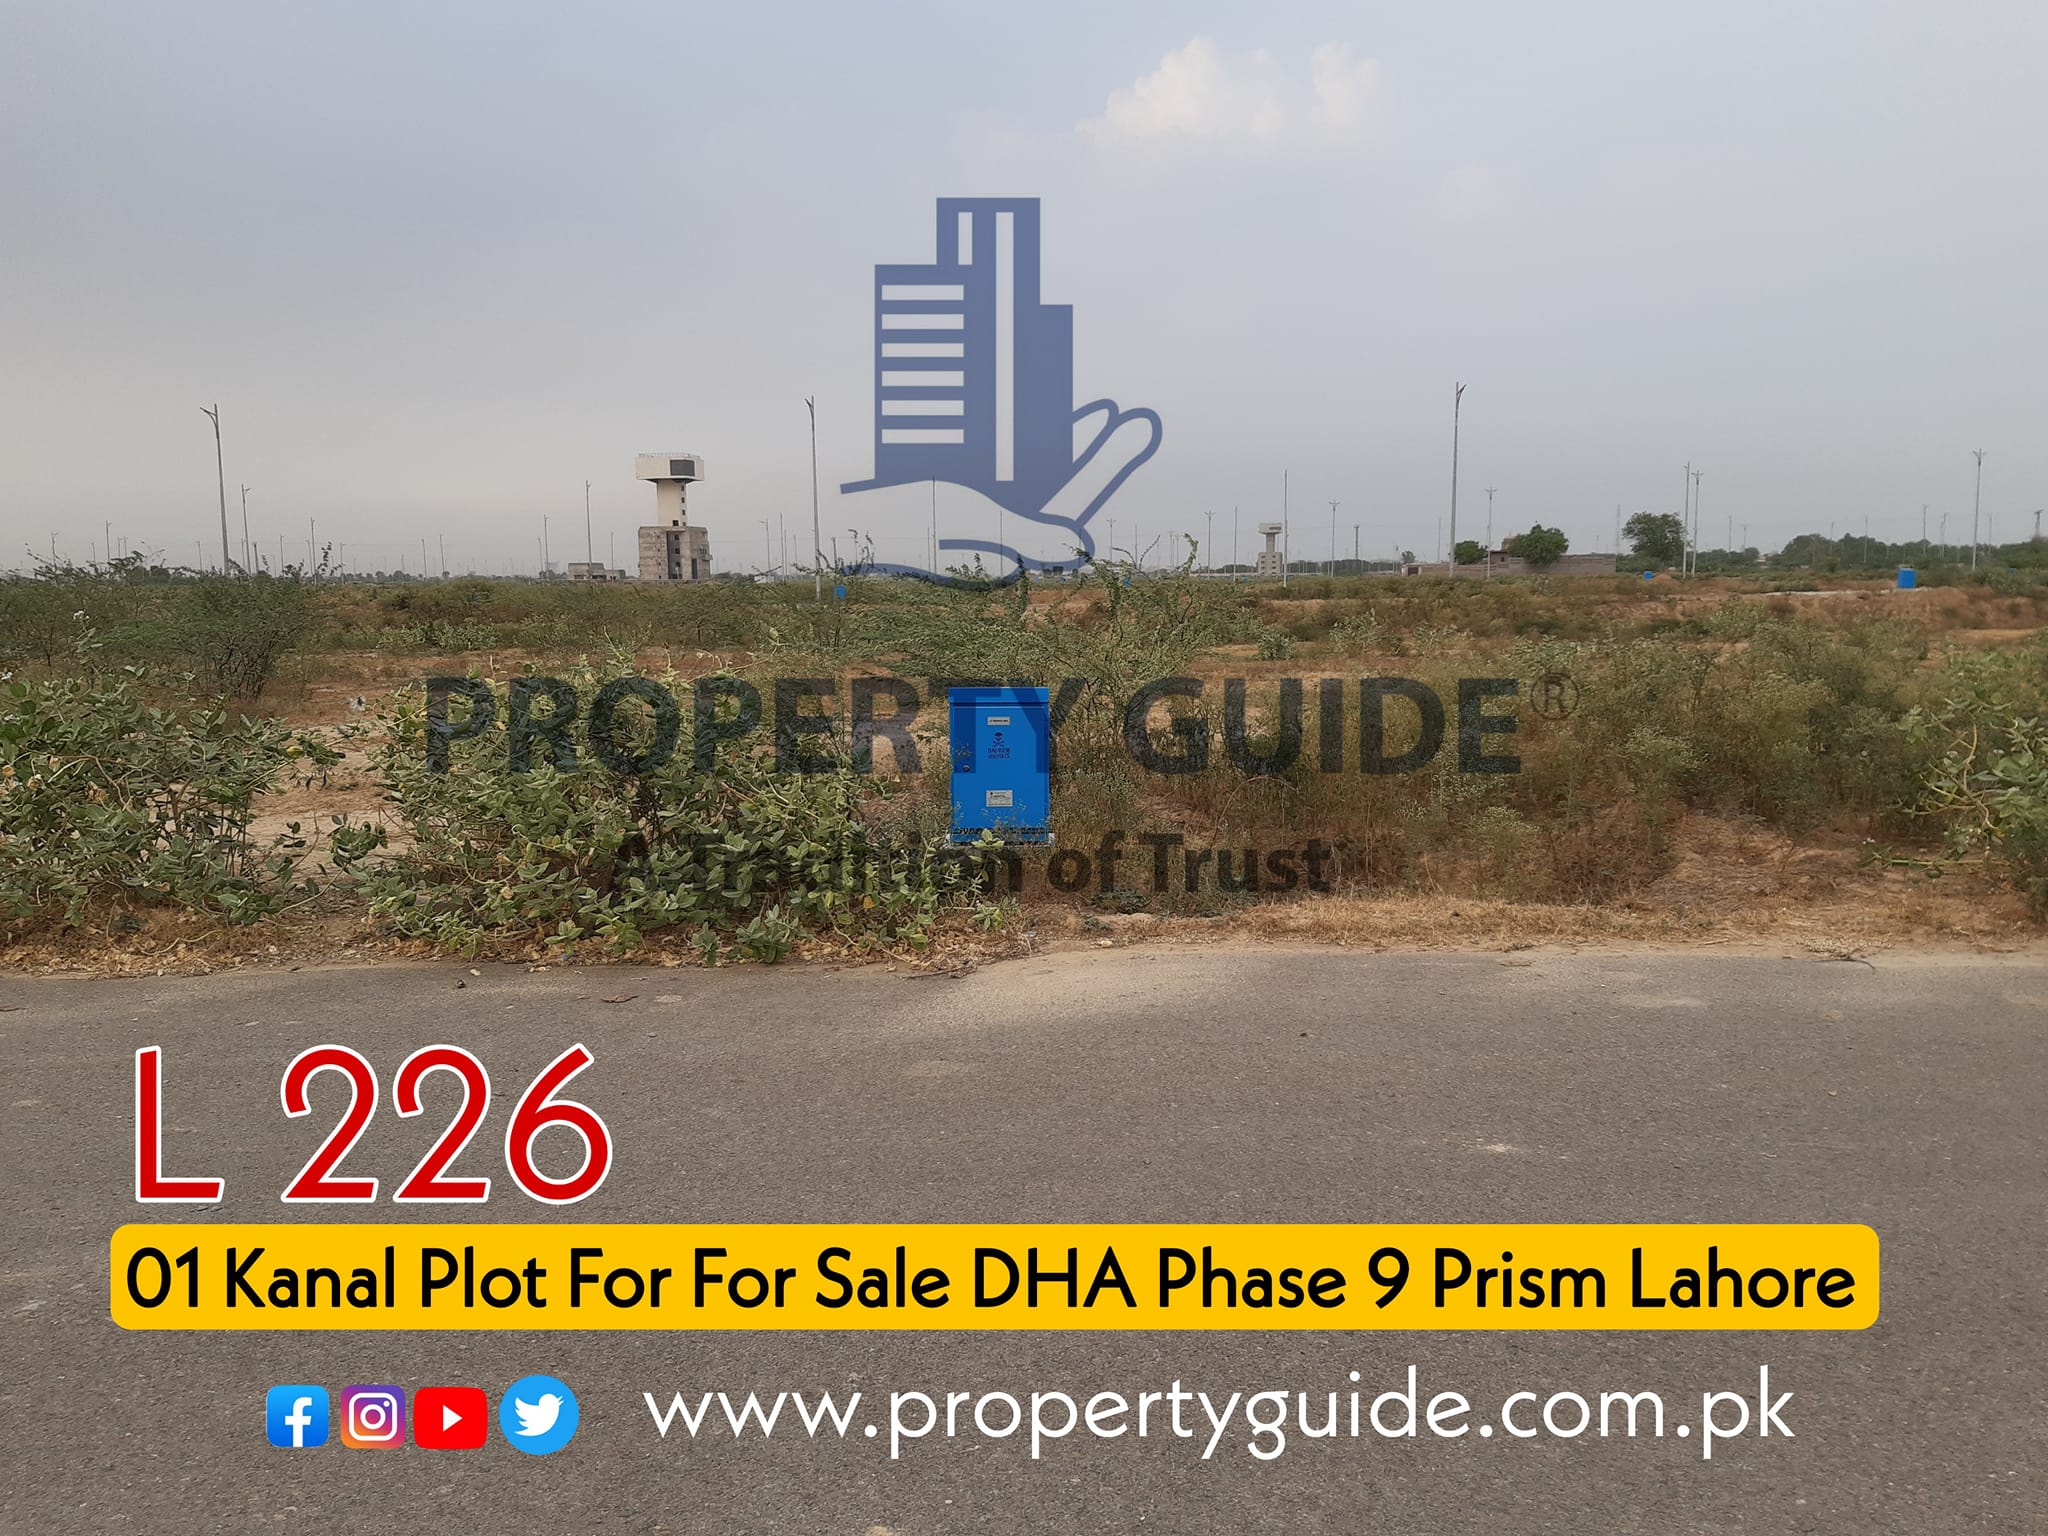 DHA Phase 9 Prism Lahore Kanal Plot For Sale